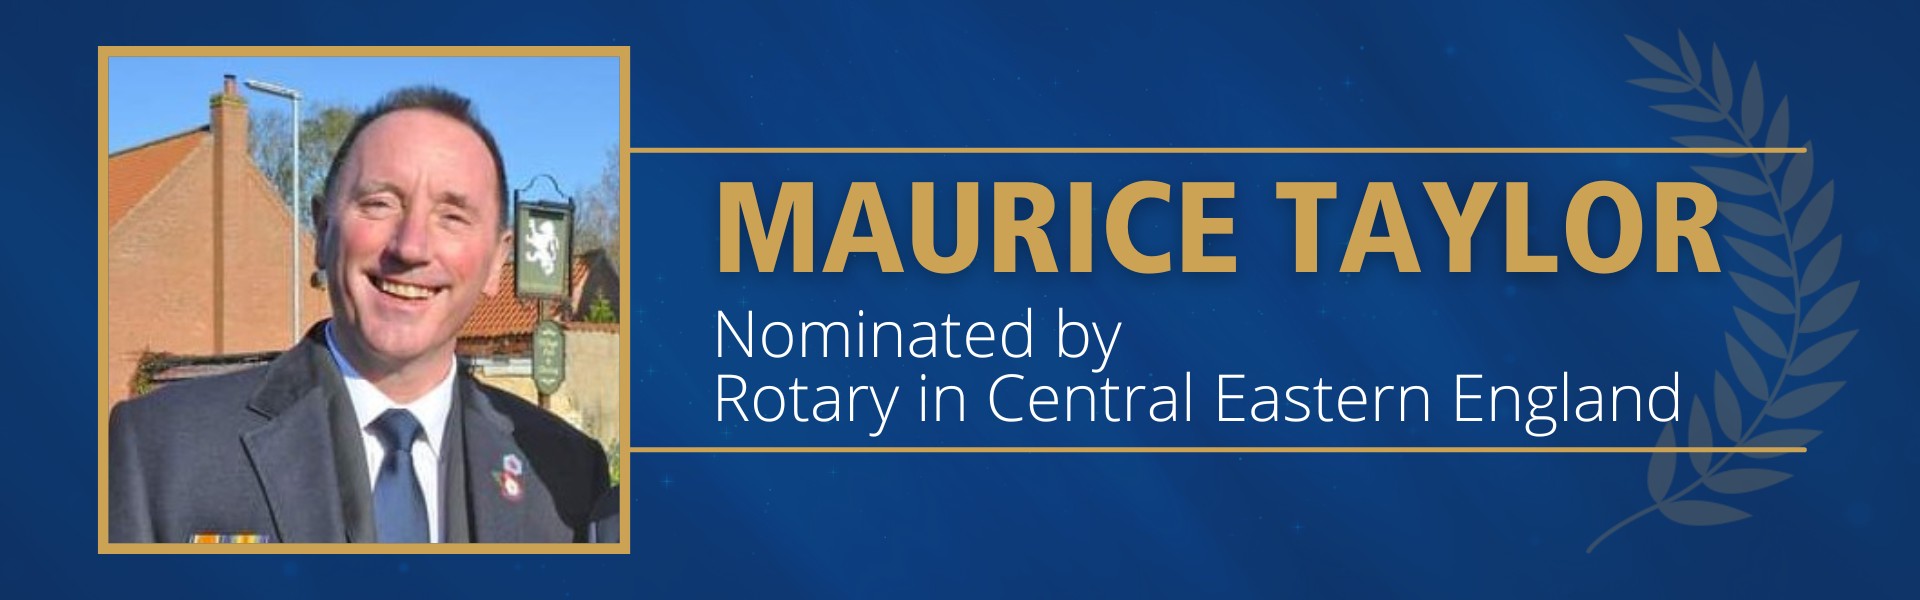 Maurice Taylor Nominated by Rotary in Central Eastern England